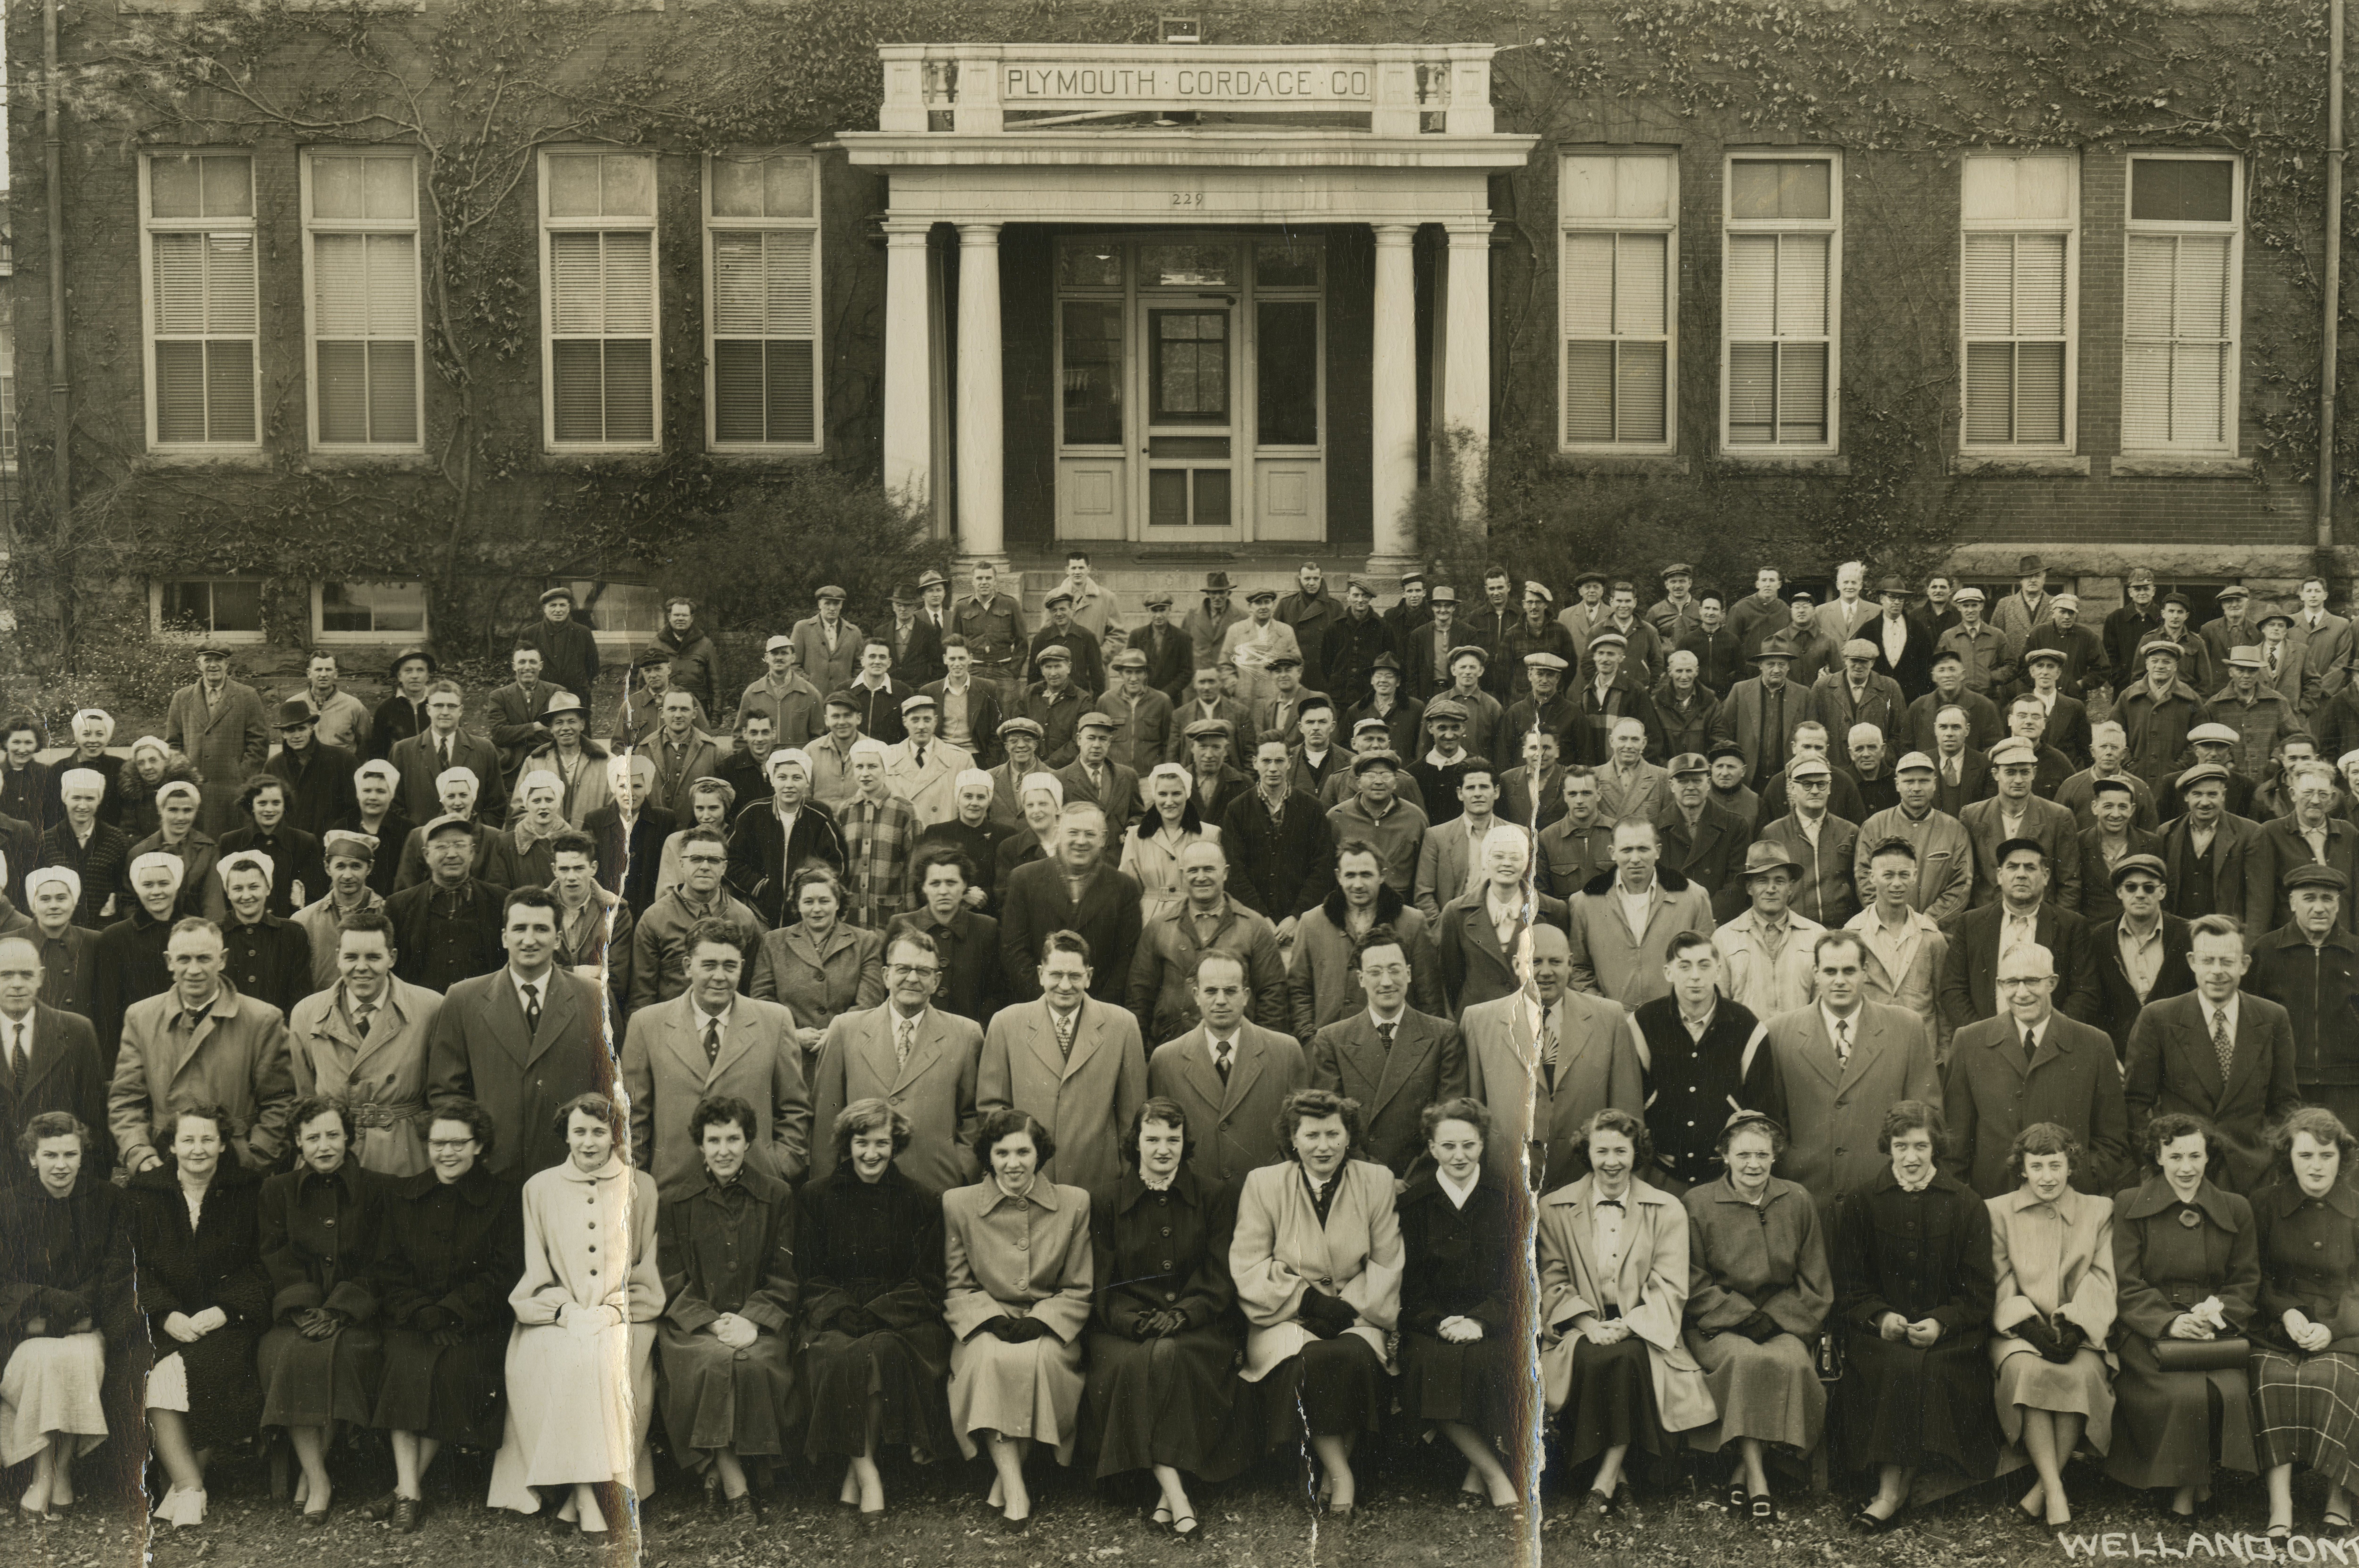 An old photograph of many rows of people in front of a building. It appears that the front row is women and the rest are men.